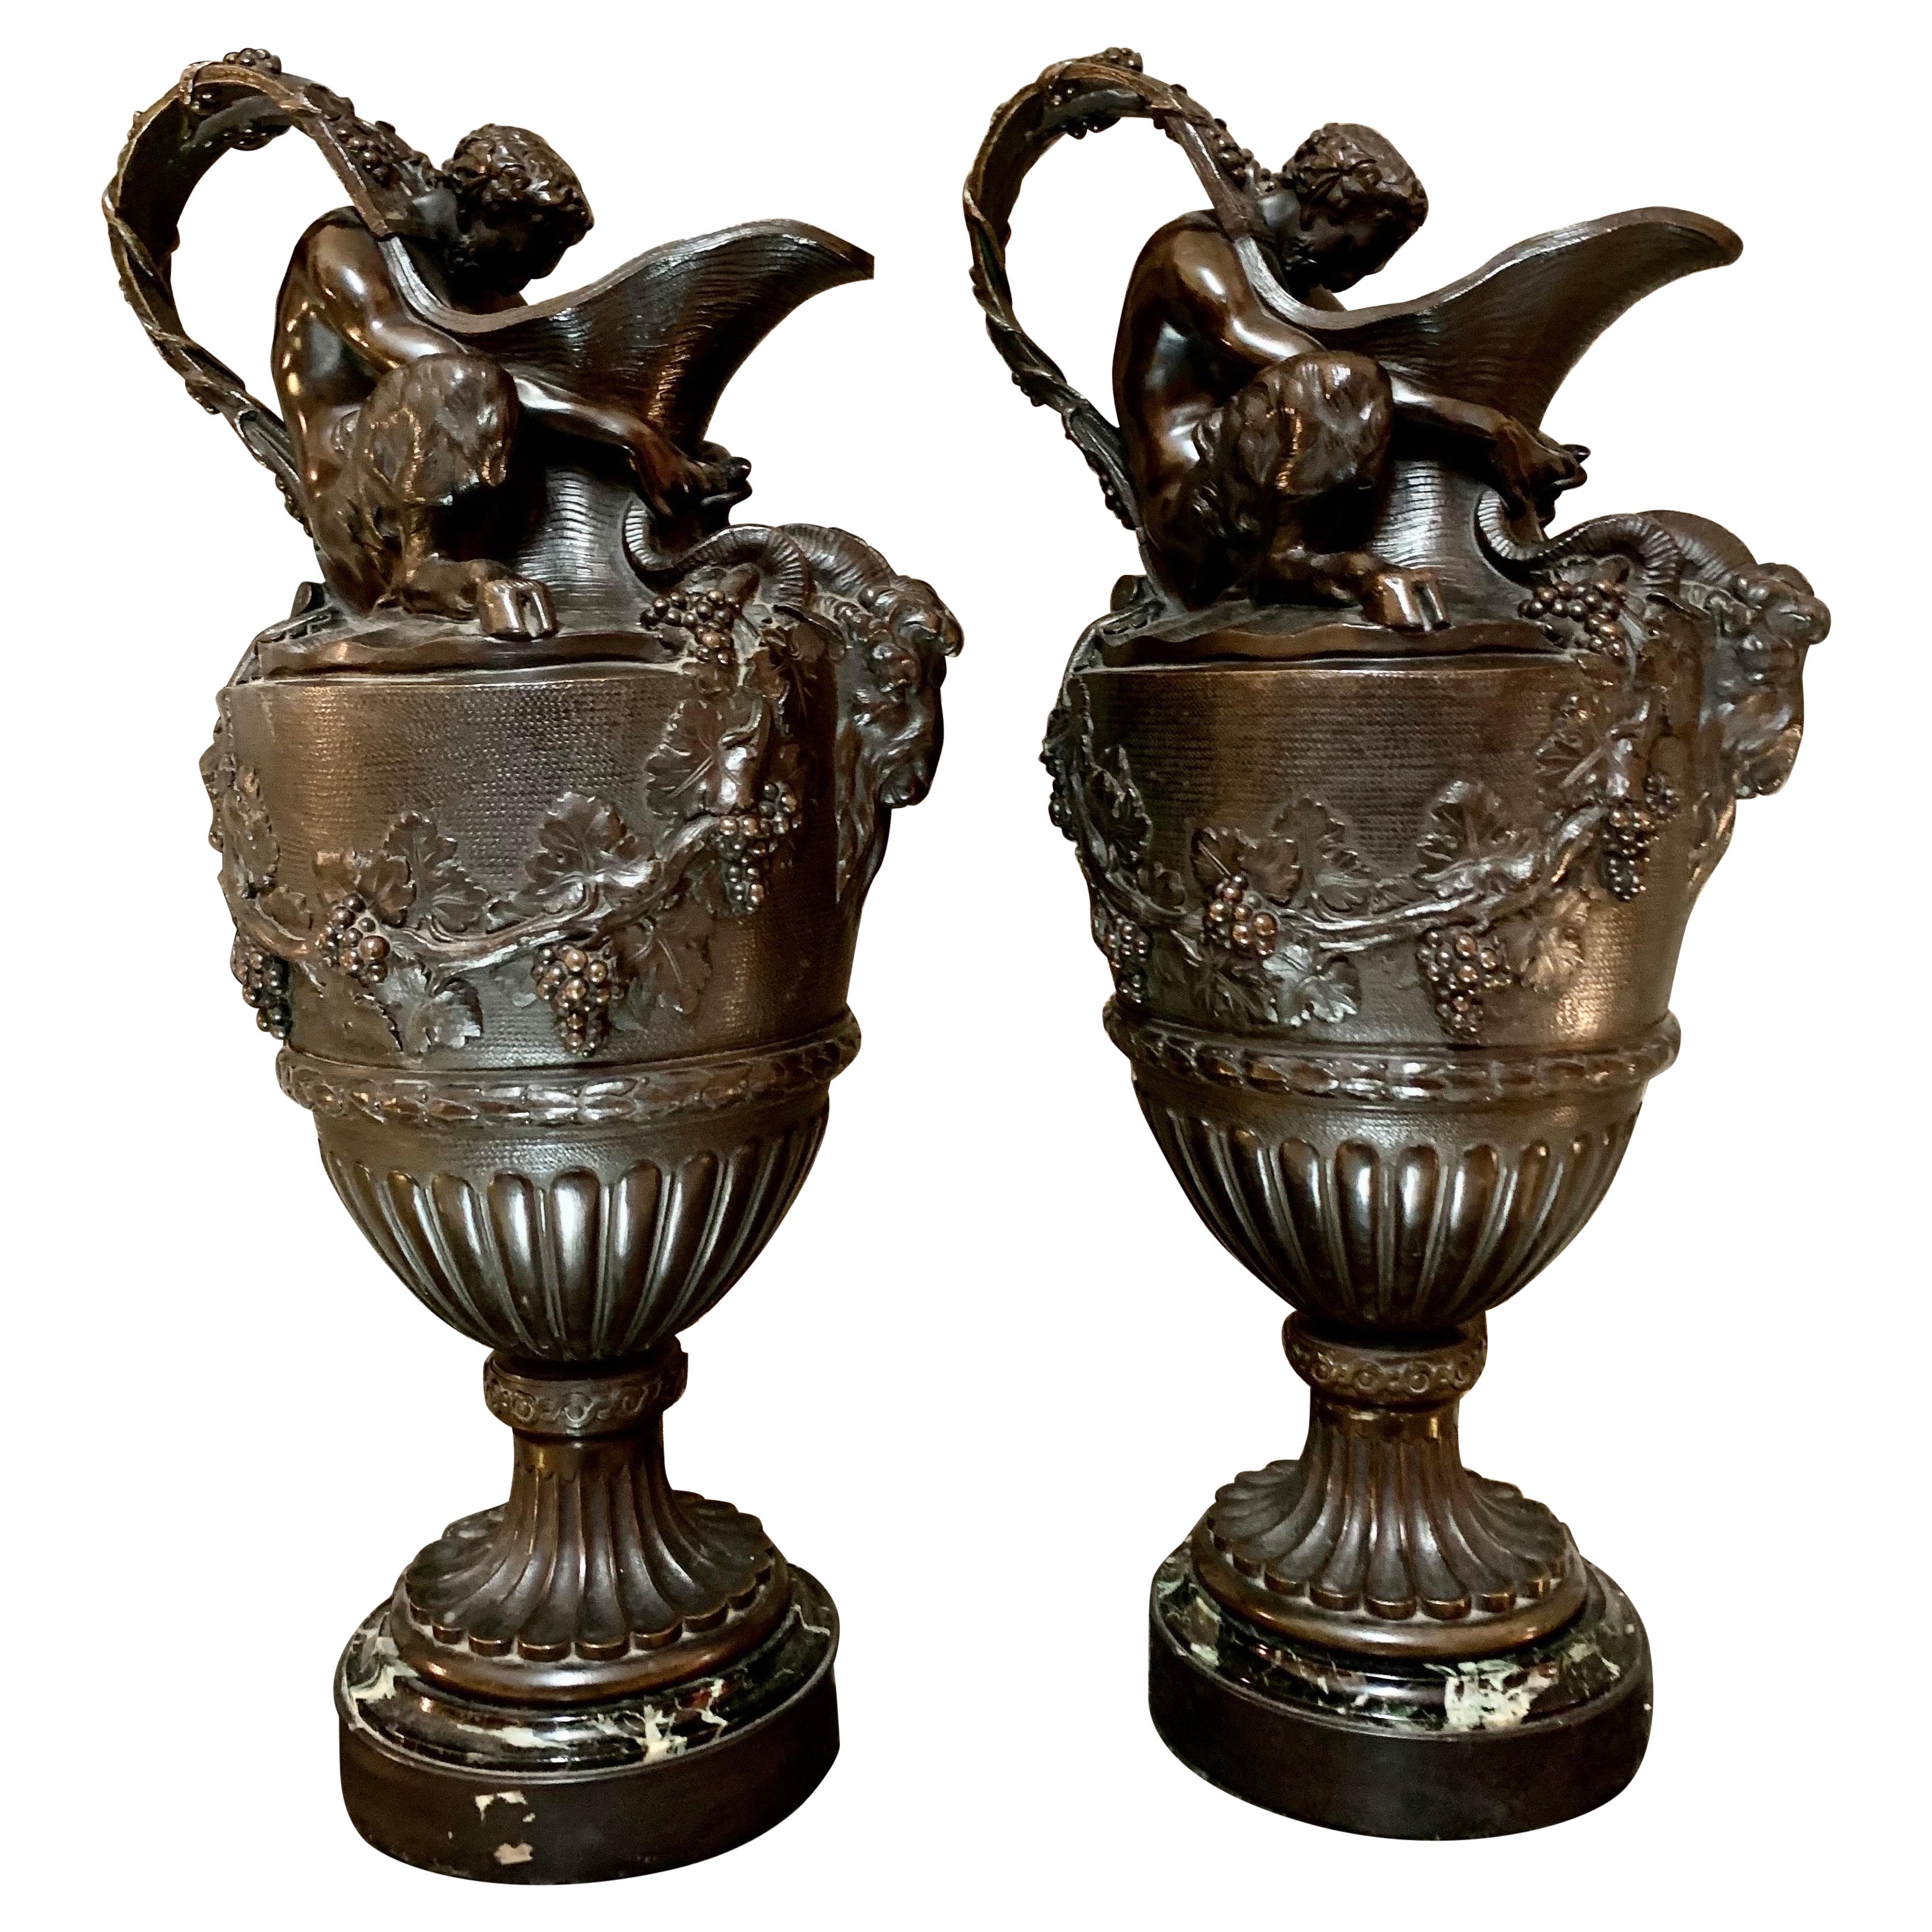 Pair of French Patinated Bronze Vases Urns Clodion Style